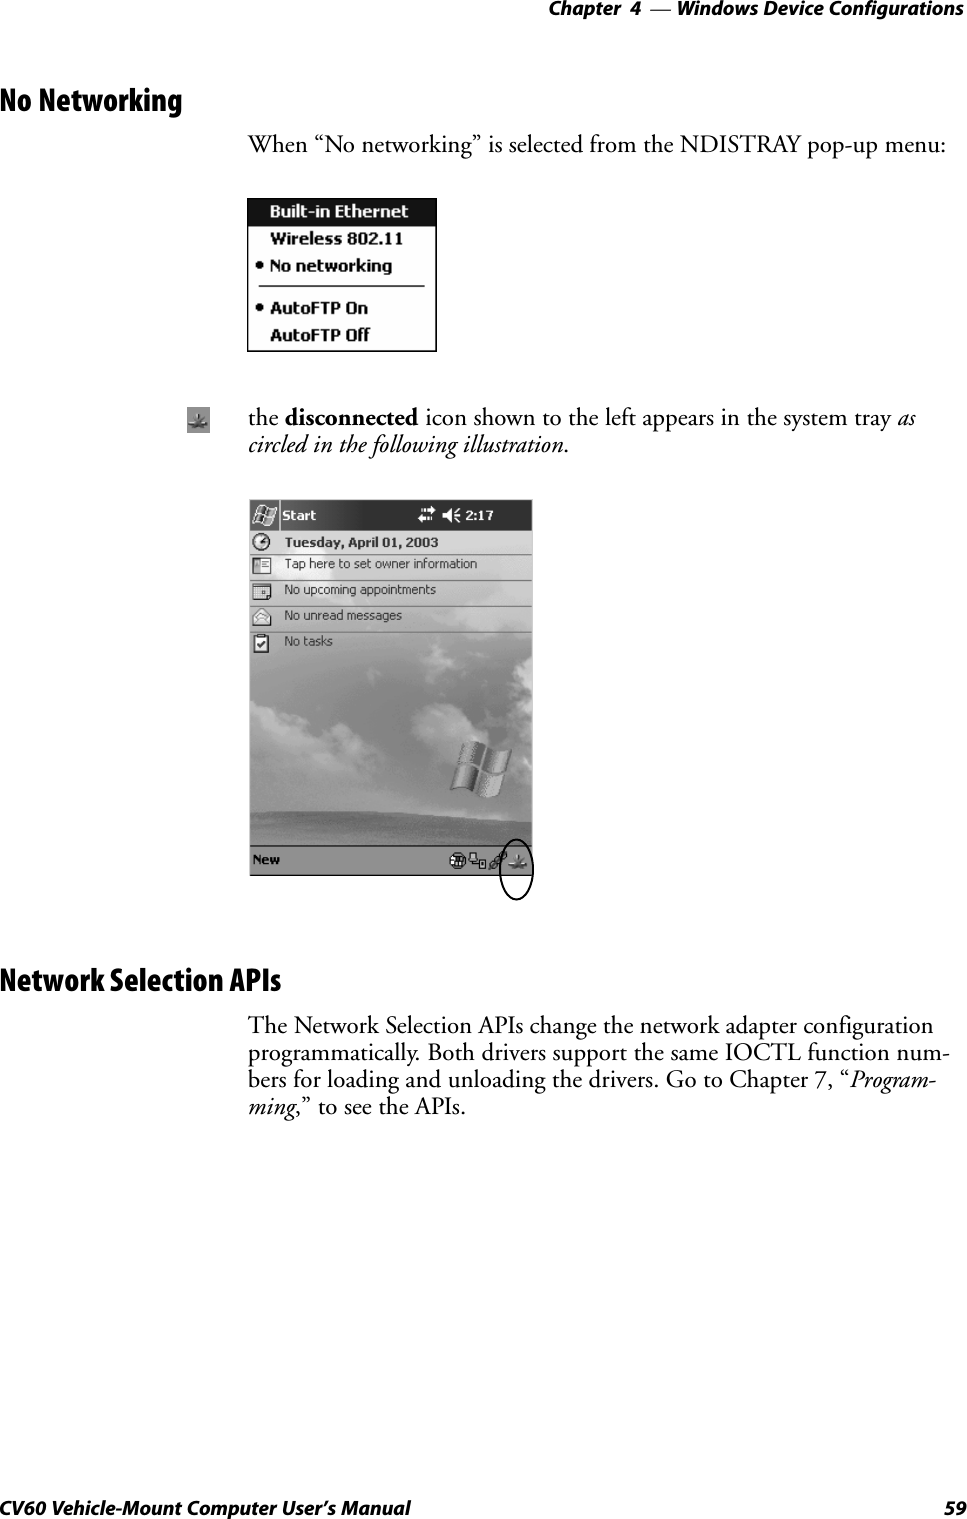 Windows Device Configurations—Chapter  459CV60 Vehicle-Mount Computer User&apos;s ManualNo NetworkingWhen No networking&quot; is selected from the NDISTRAY popĆup menu:the disconnected icon shown to the left appears in the system tray ascircled in the following illustration.Network Selection APIsThe Network Selection APIs change the network adapter configurationprogrammatically. Both drivers support the same IOCTL function numĆbers for loading and unloading the drivers. Go to Chapter 7, ProgramĆming,&quot; to see the APIs.